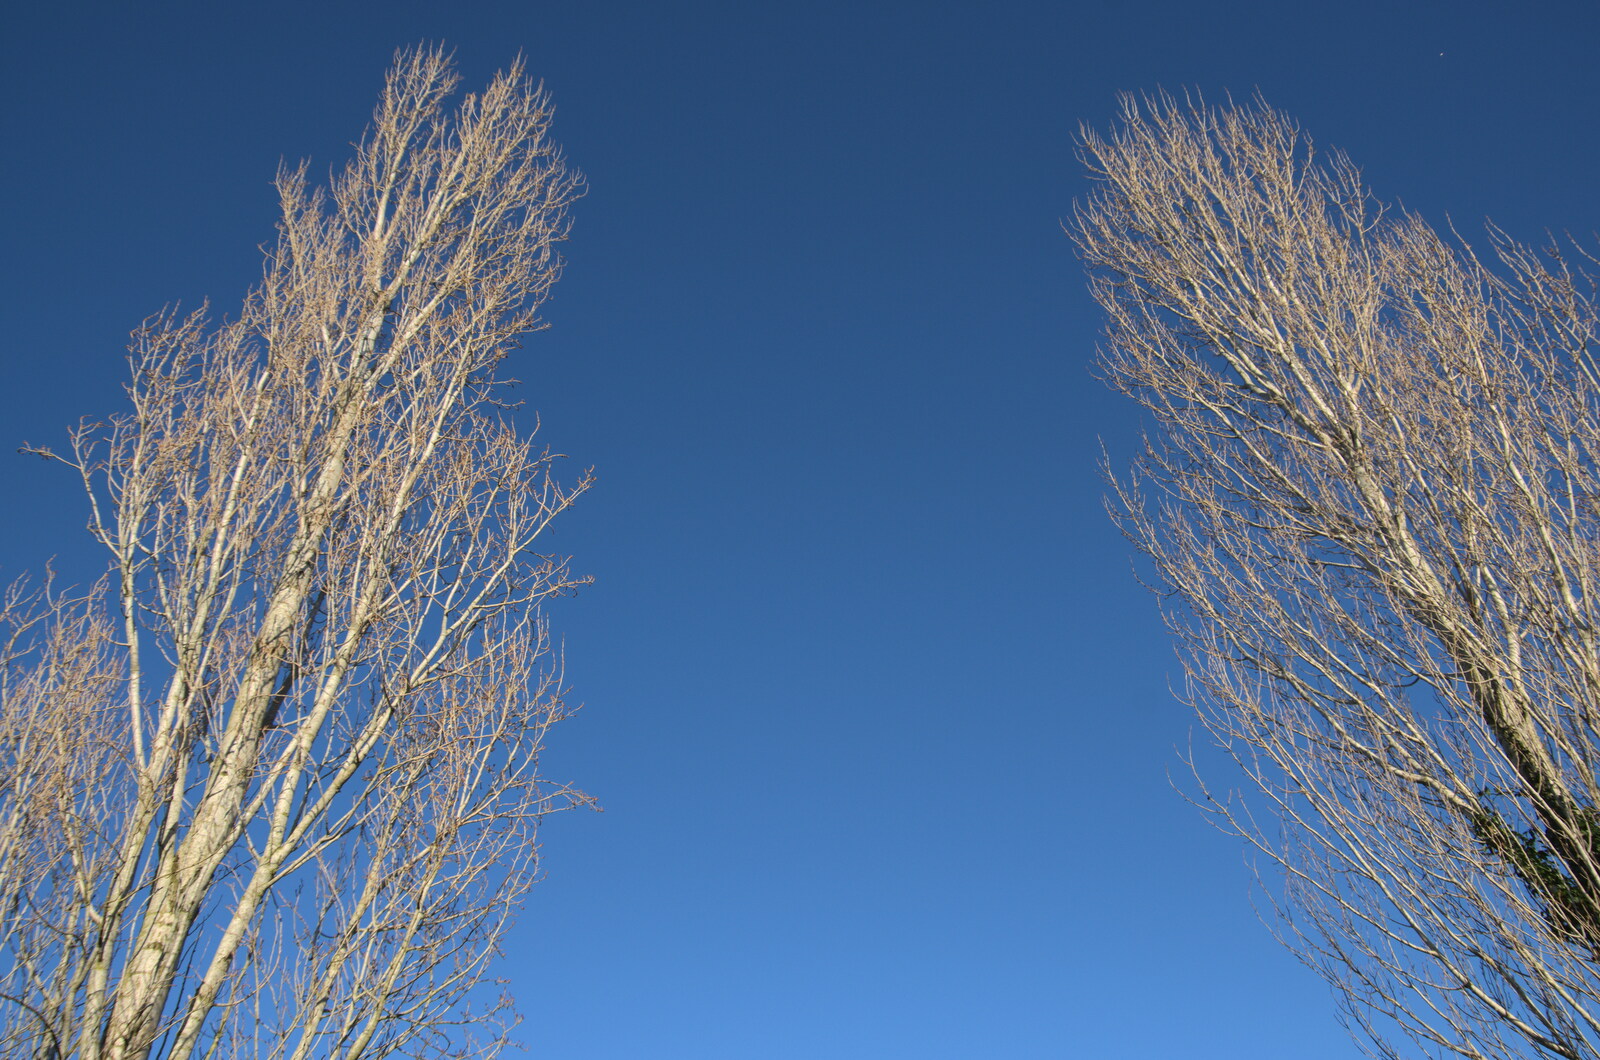 Silvery trees in a blue sky from Snowdrops at Talconeston Hall, Tacolneston, Norfolk - 7th February 2020